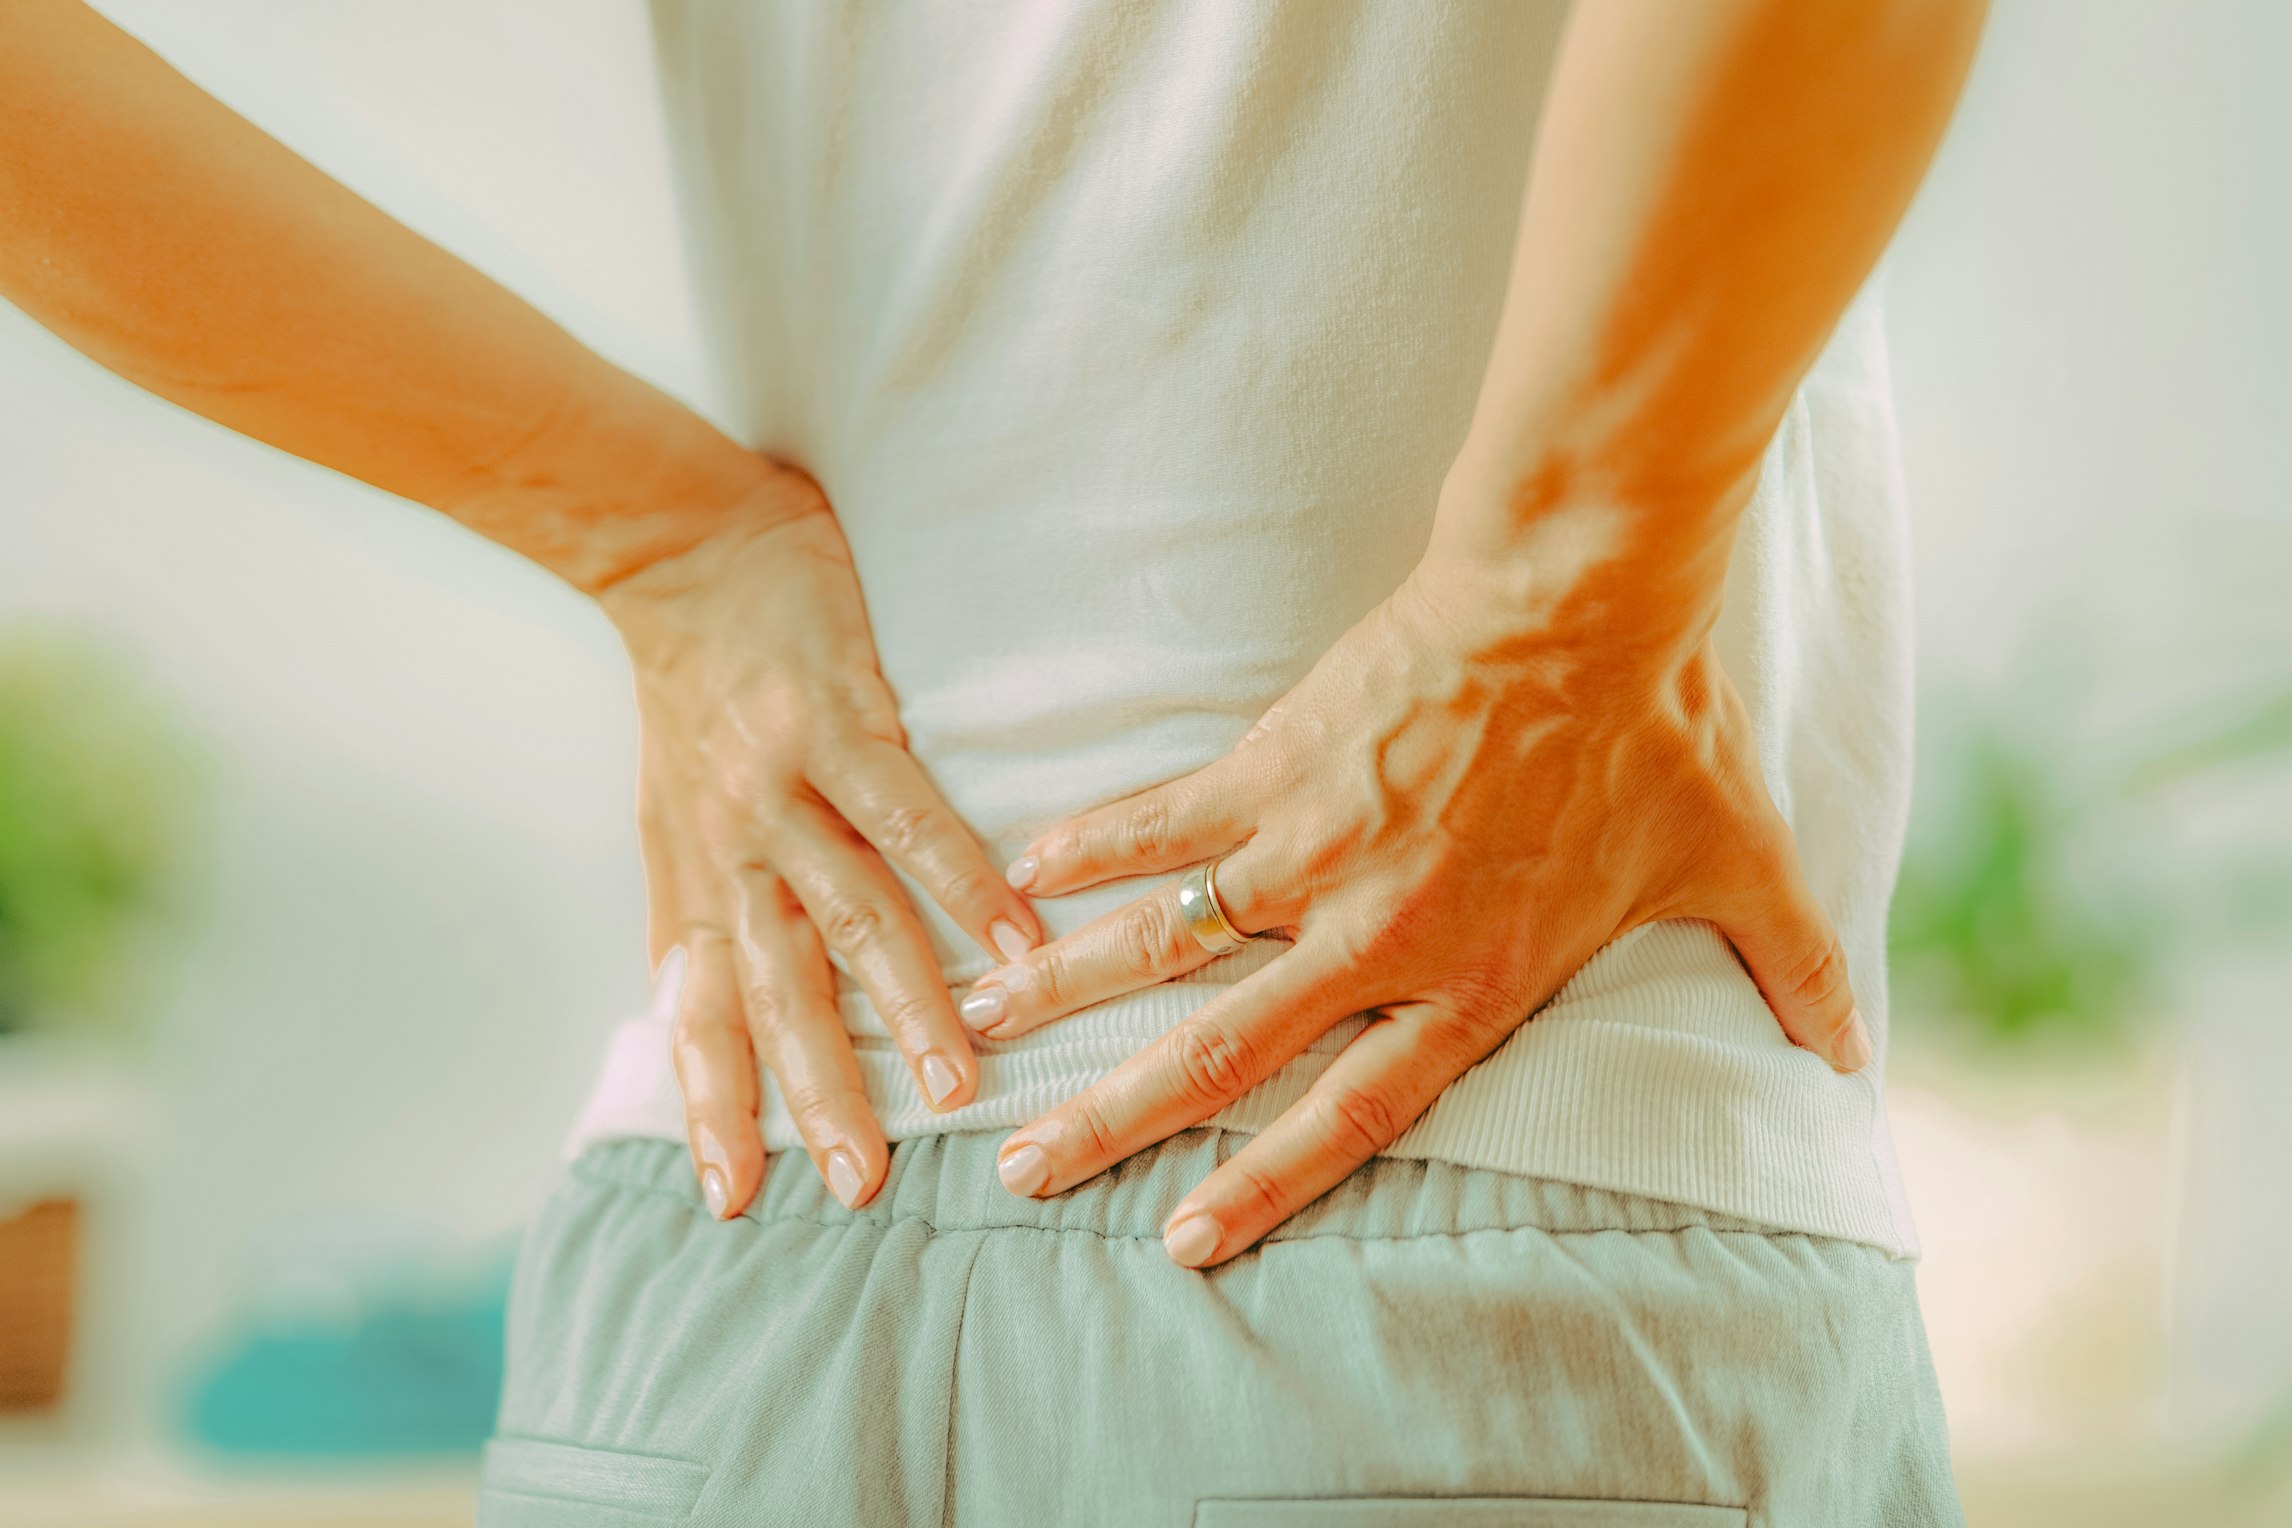 Can you get a medical cannabis card for chronic back pain in the UK? 